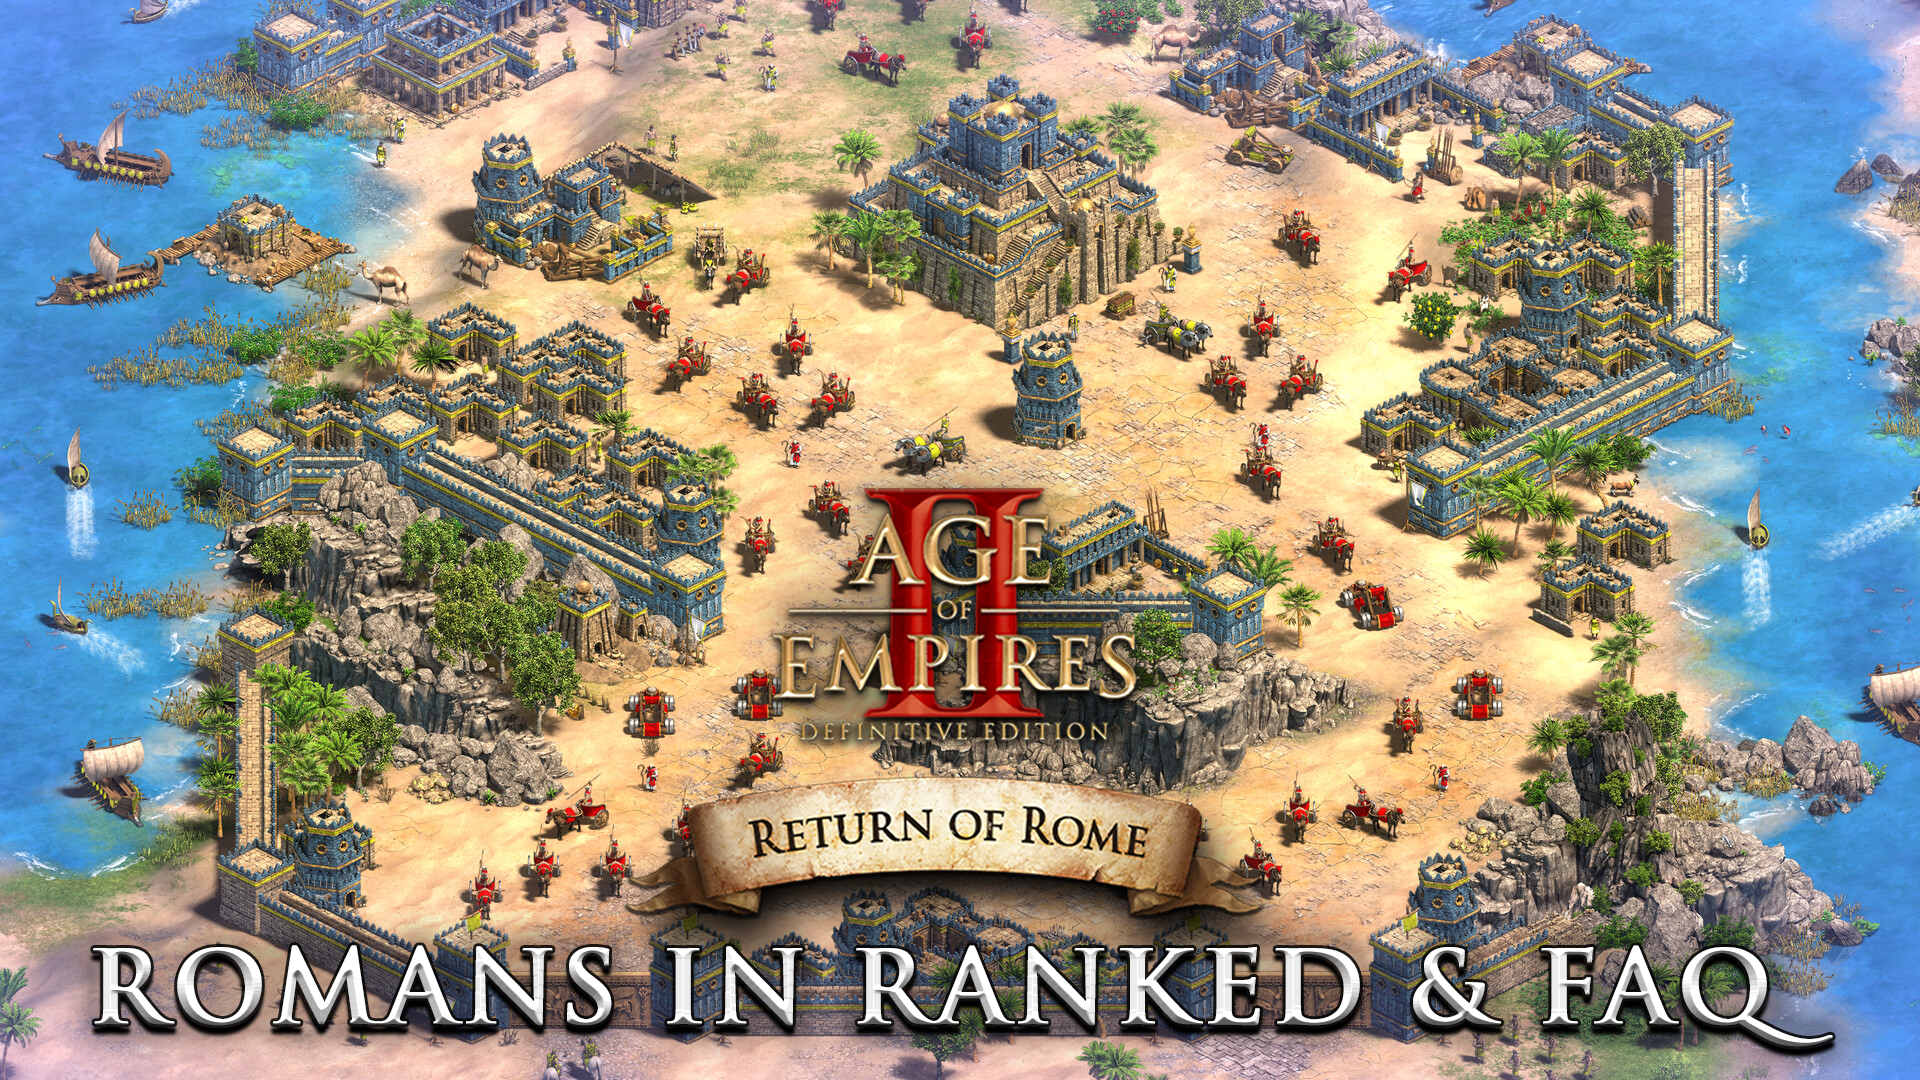 Rise of Nations helped teach the Age of Empires 4 devs what Age